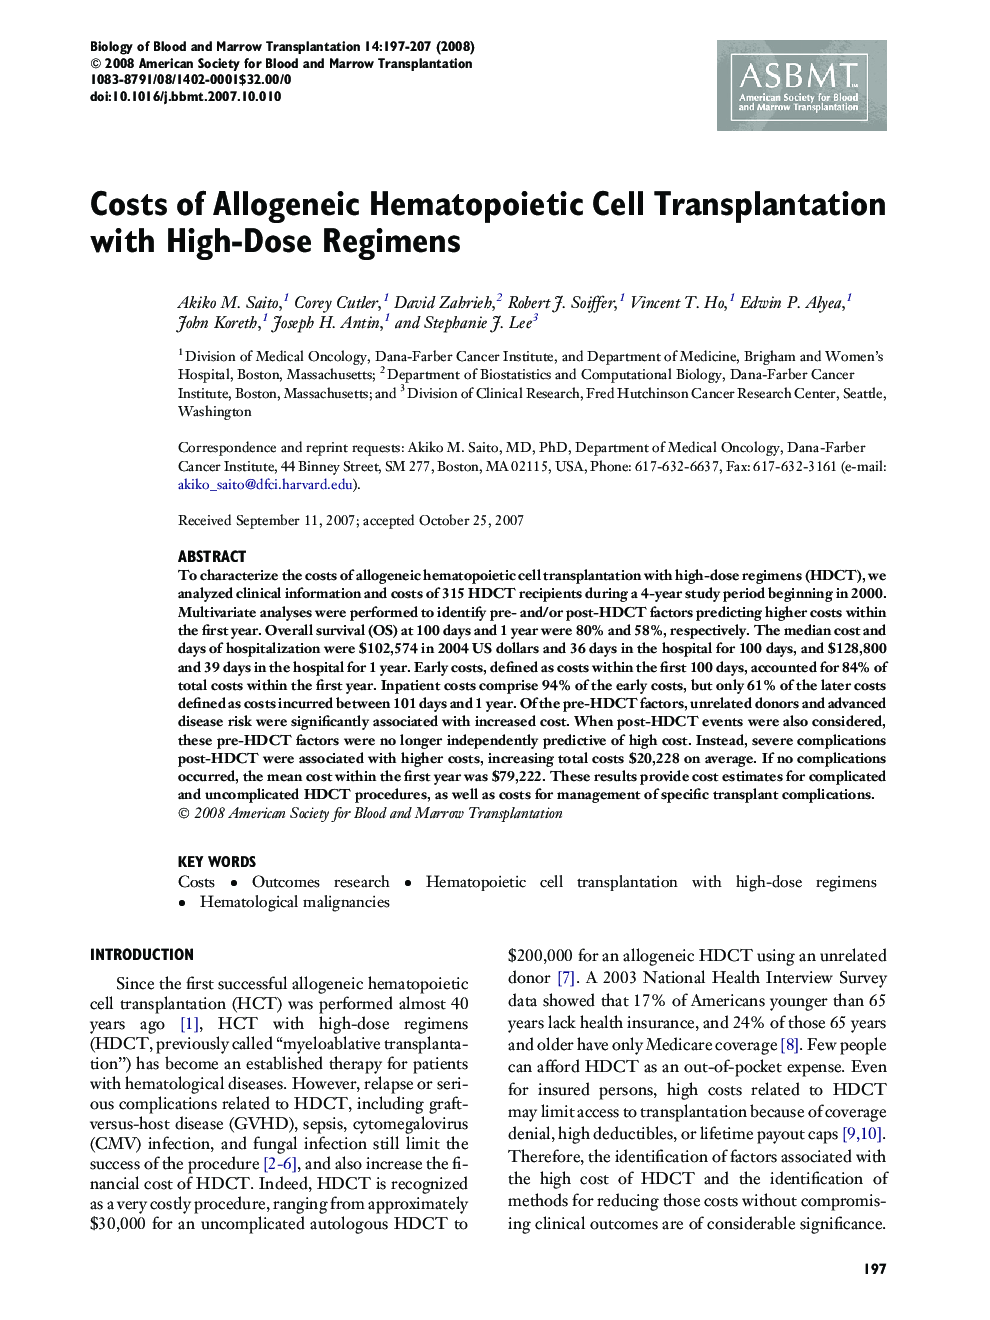 Costs of Allogeneic Hematopoietic Cell Transplantation with High-Dose Regimens